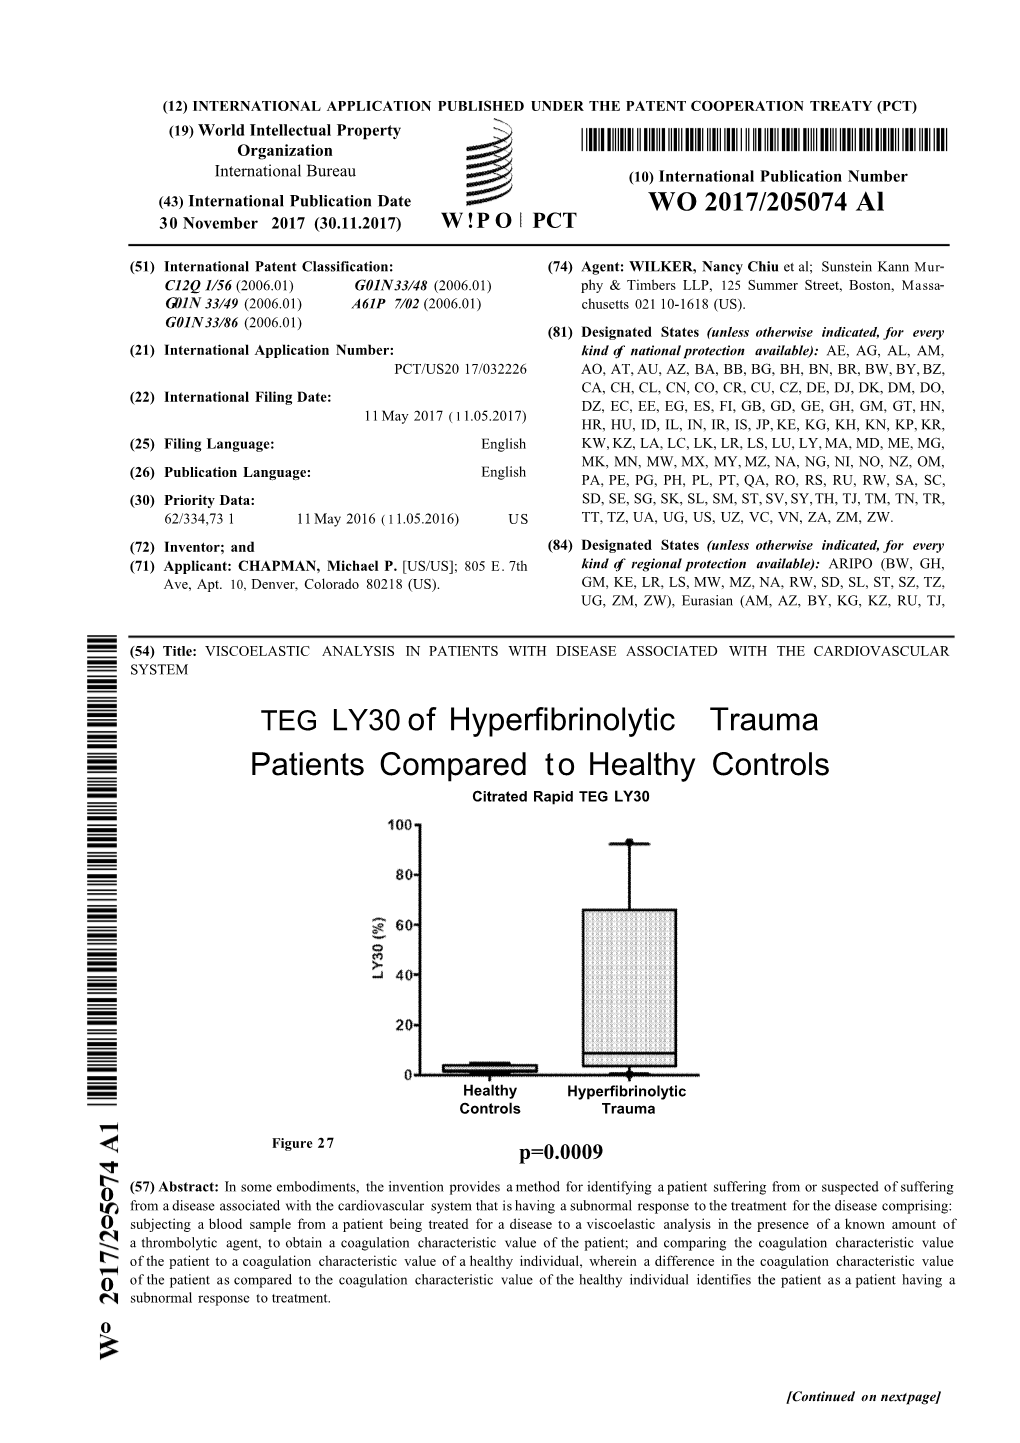 TEG LY30 of Hyperfibrinolytic Trauma Patients Compared to Healthy Controls Citrated Rapid TEG LY30